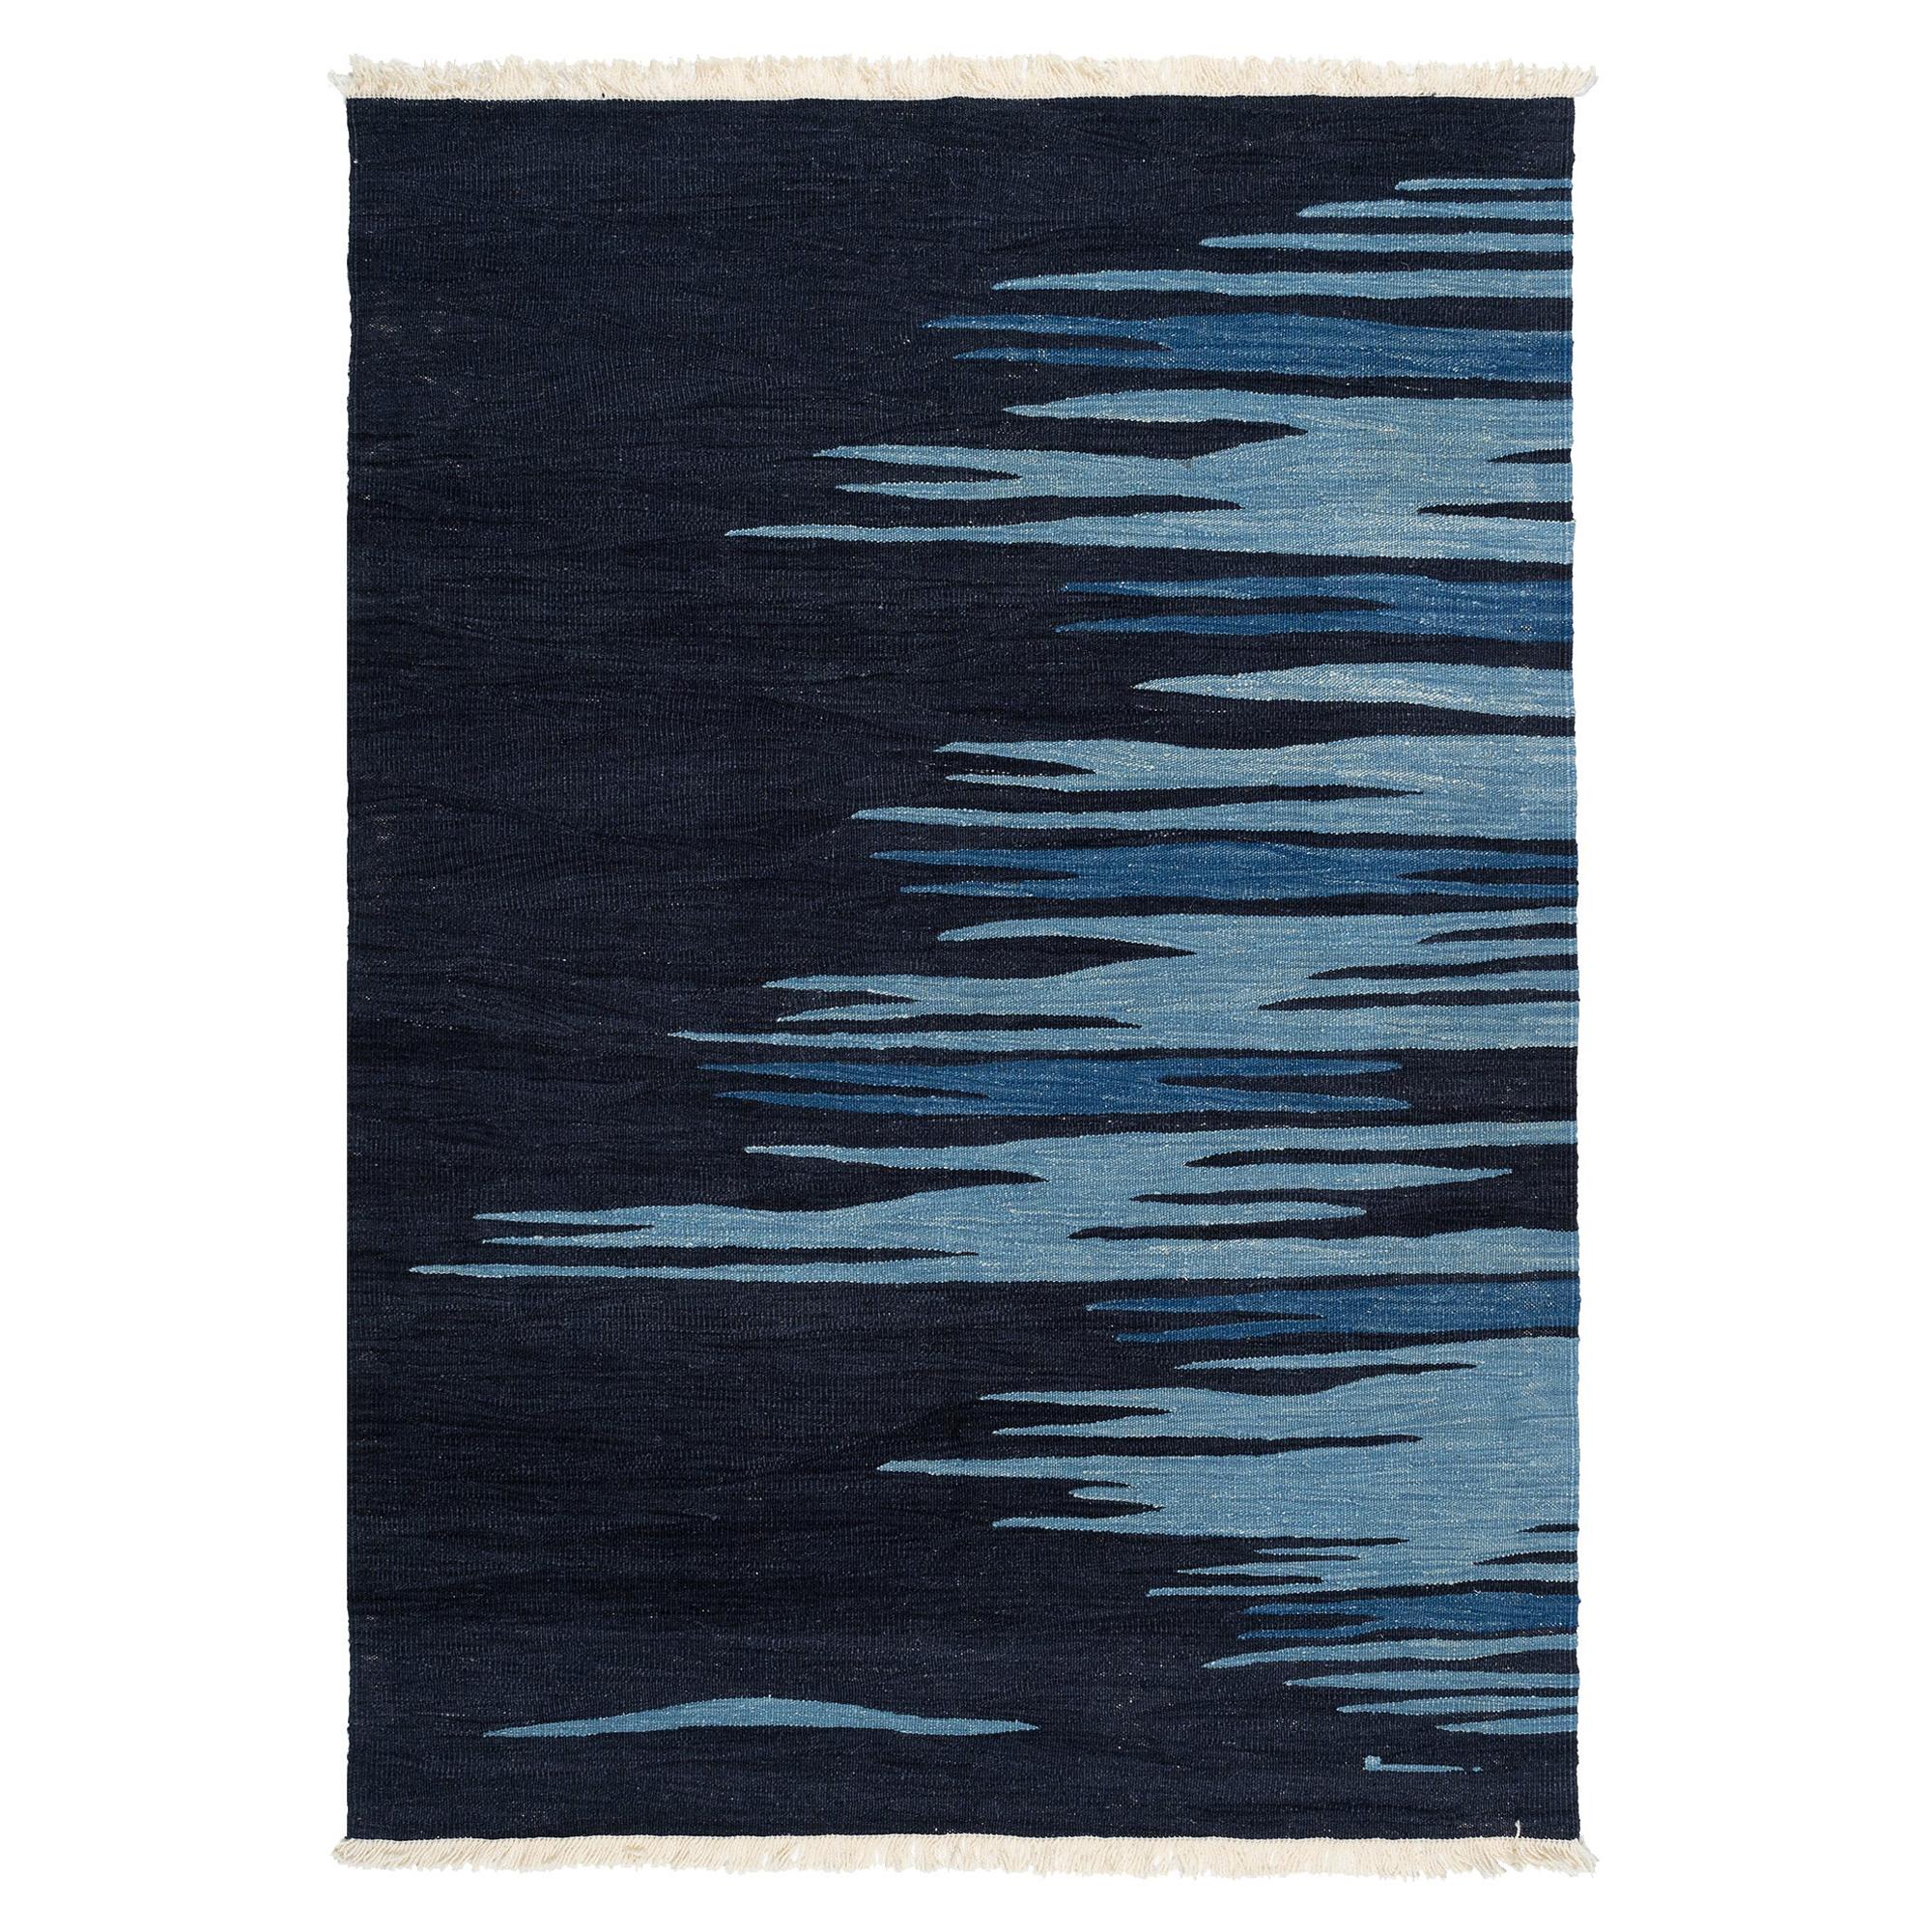 Ege No 2 Contemporary Modern Kilim Rug Wool Handwoven Midnight and Blue For Sale